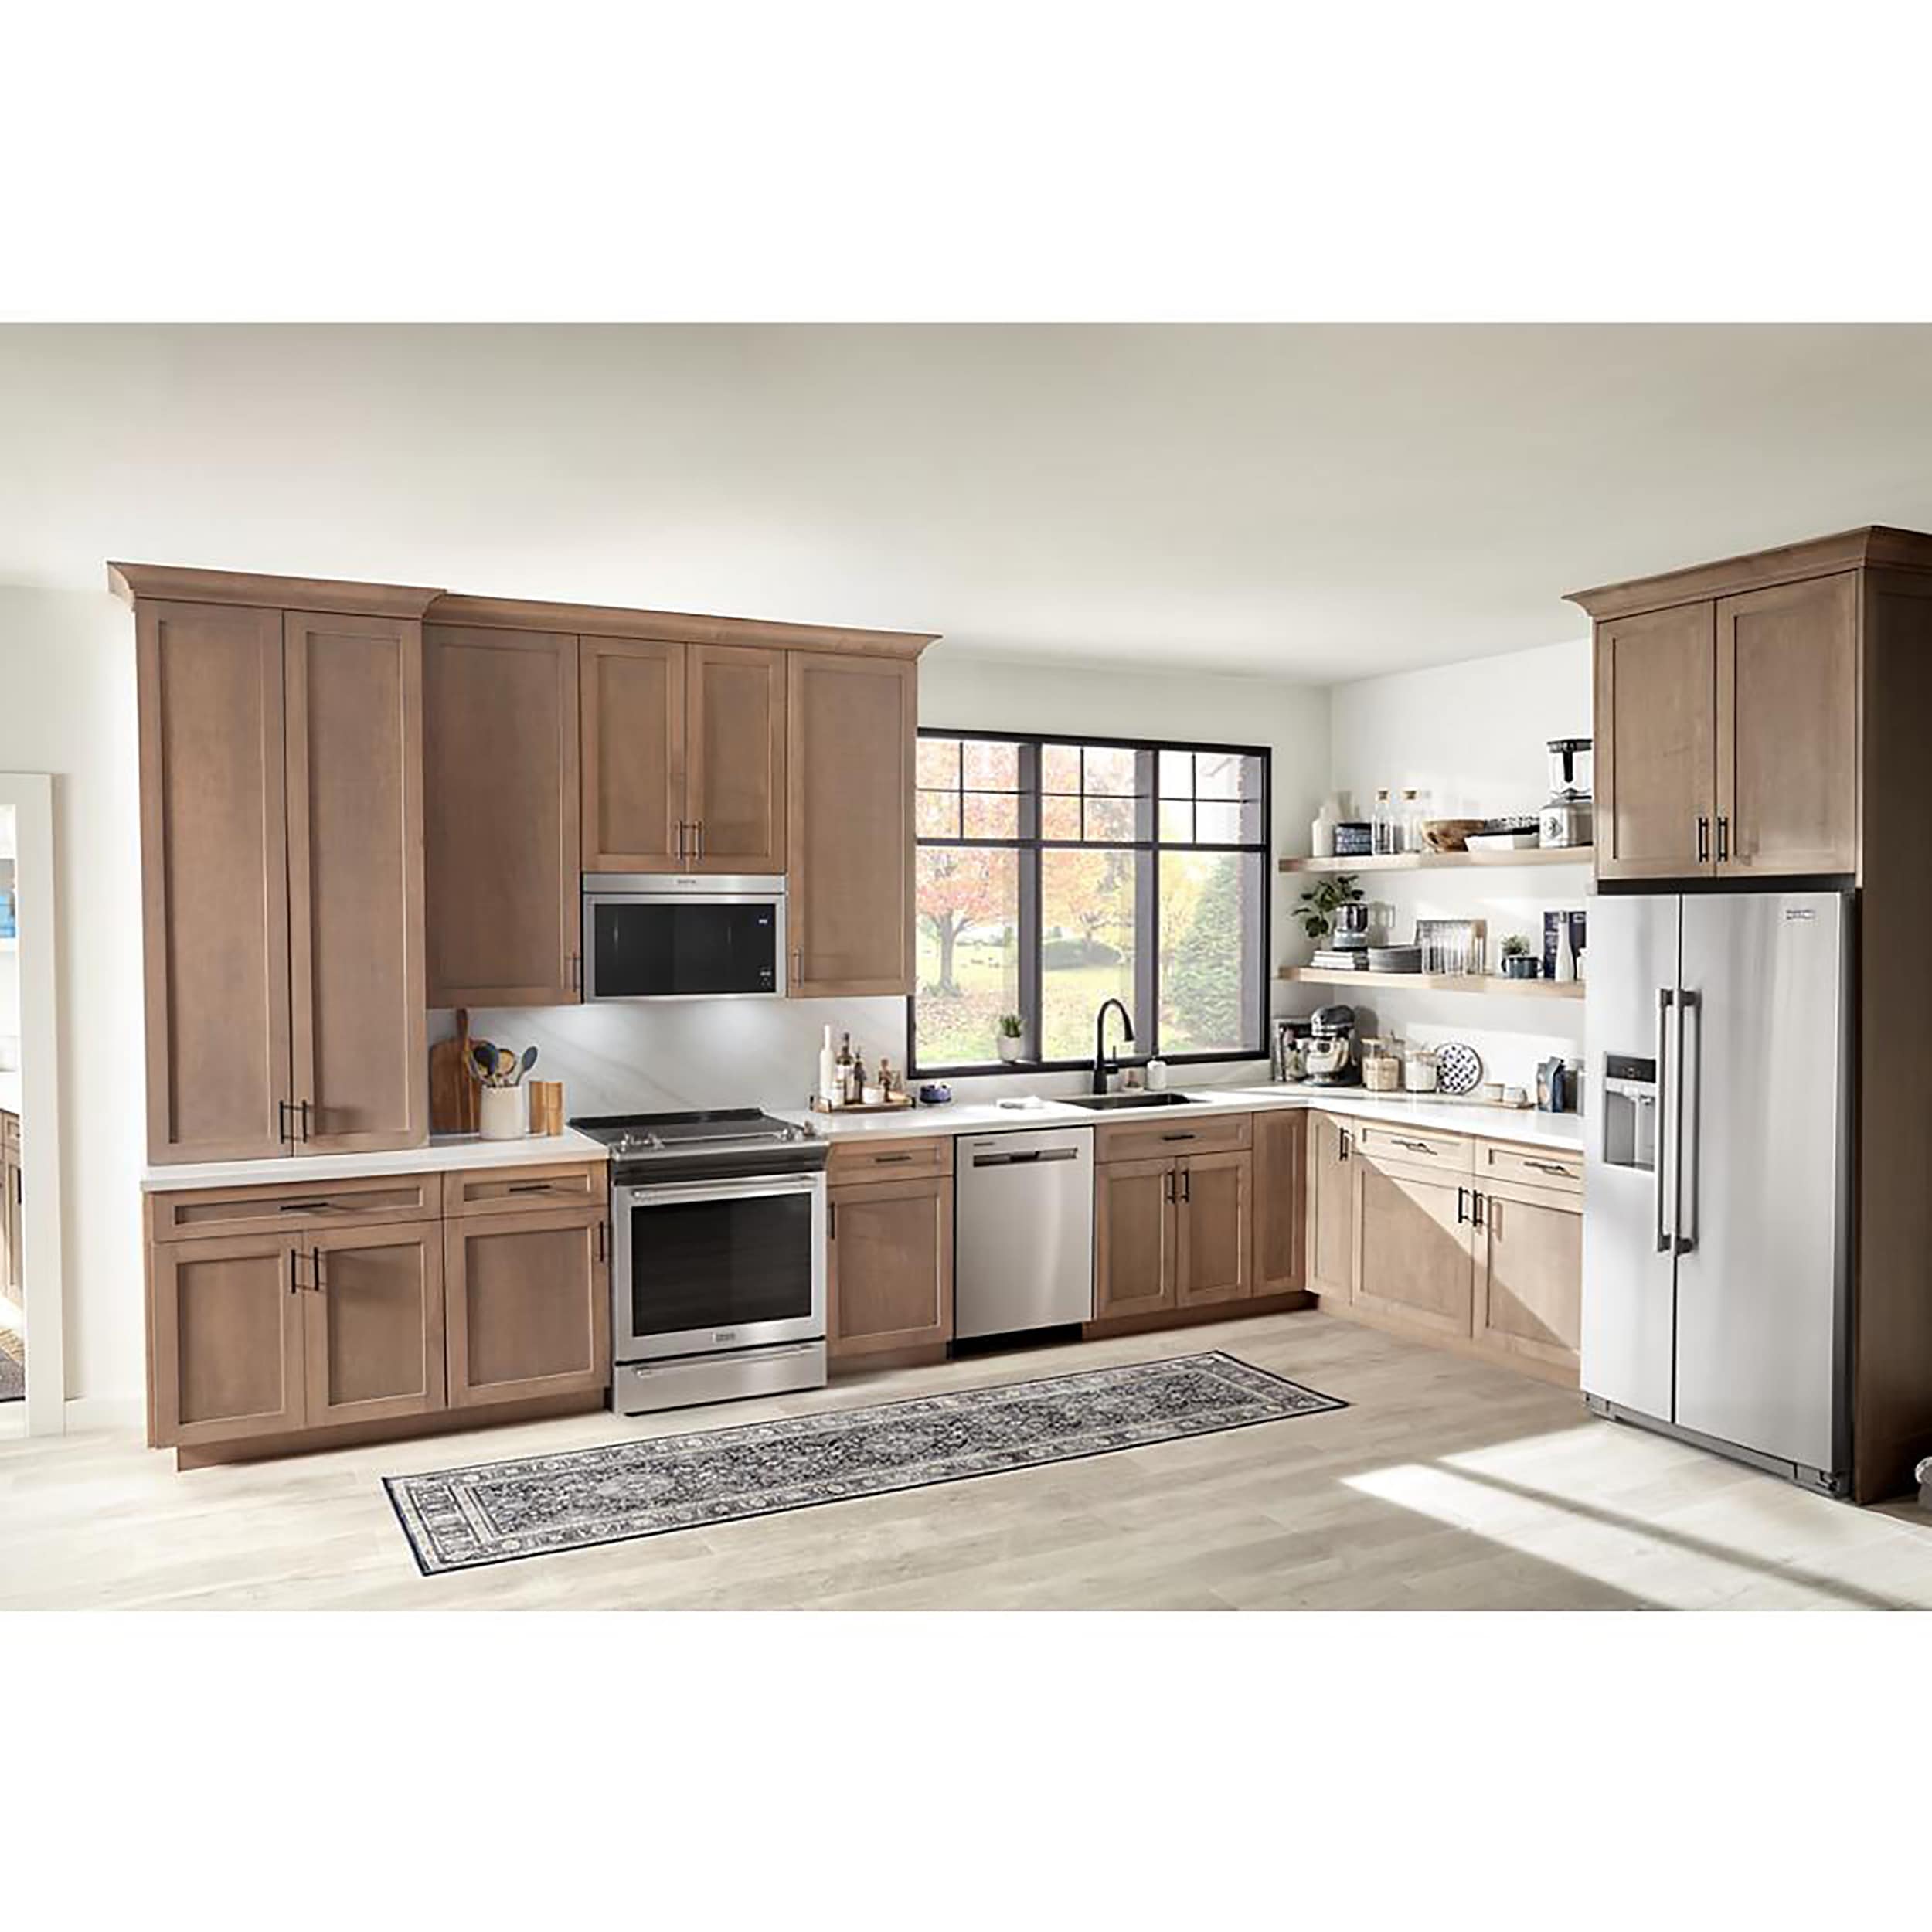 Maytag® 1.1 Cu. Ft. White Over The Range Microwave, Maine's Top Appliance  and Mattress Retailer